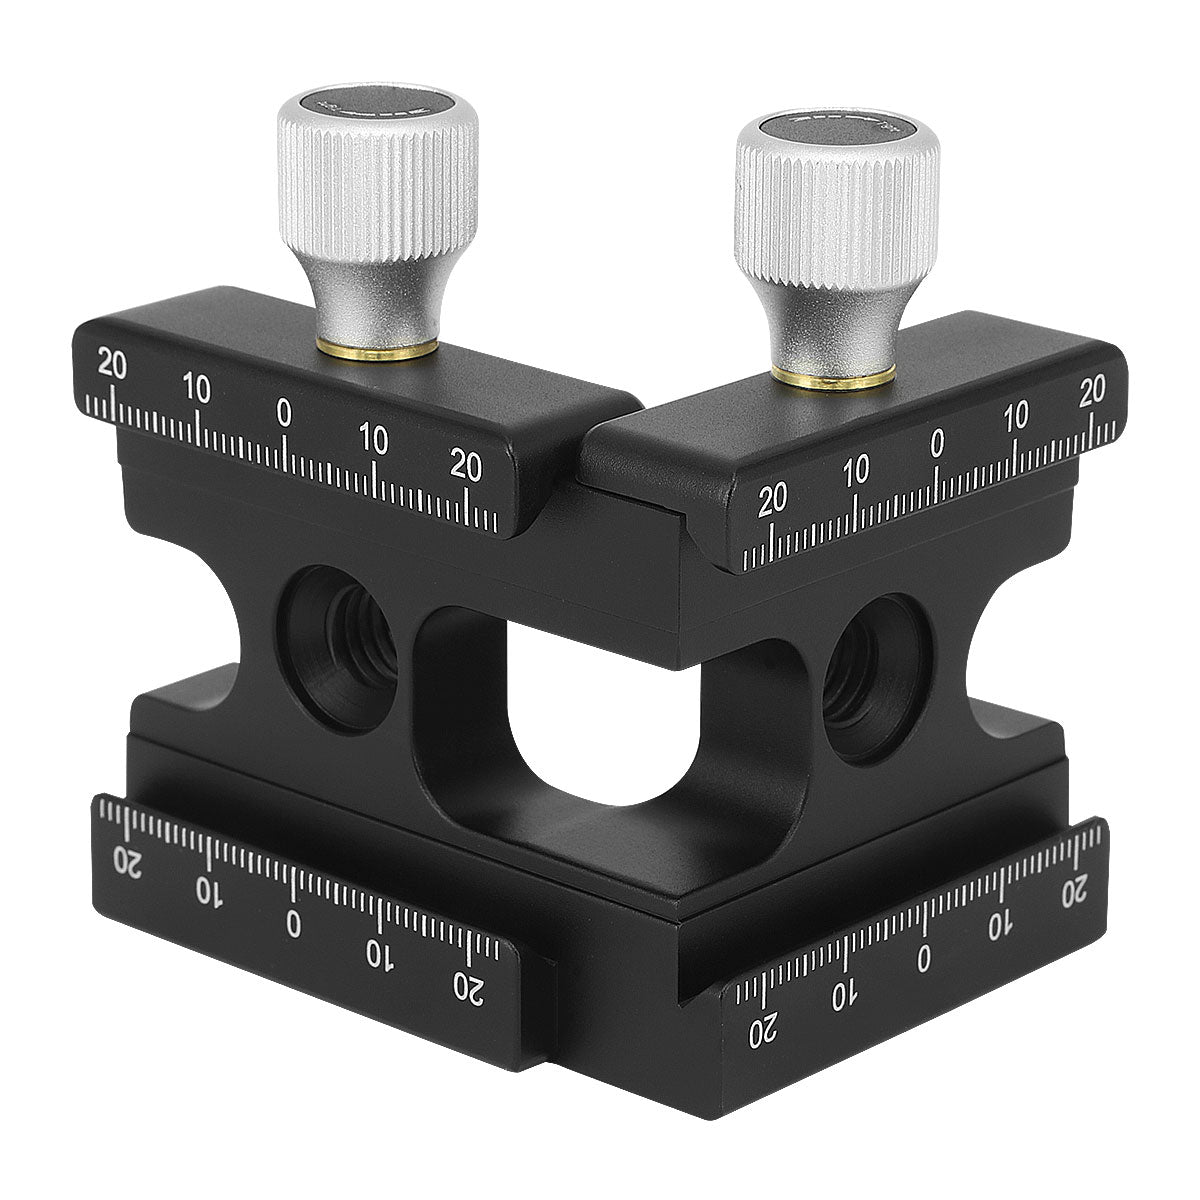 Haoge CP-RA90 Right Angle Clamp 90 Degree Double Quick Release L Clamp with 1/4 Screw Thread for Arca Swiss RRS Benro Rail Plate Nodal Slide